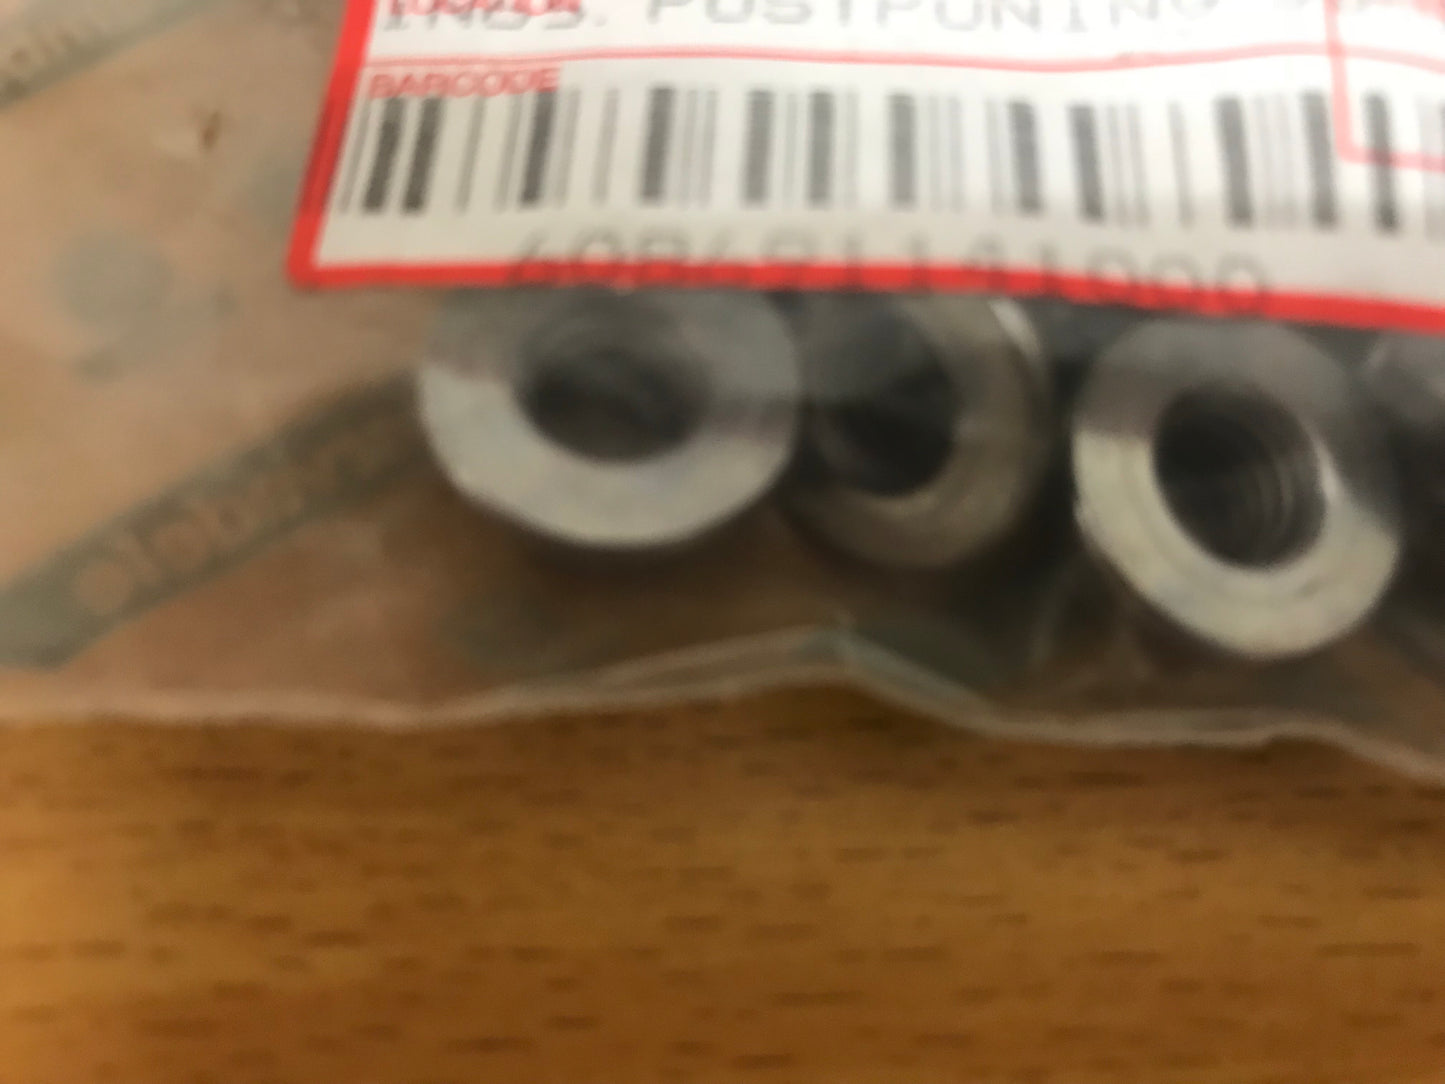 Nut pack of 10 - 51998150